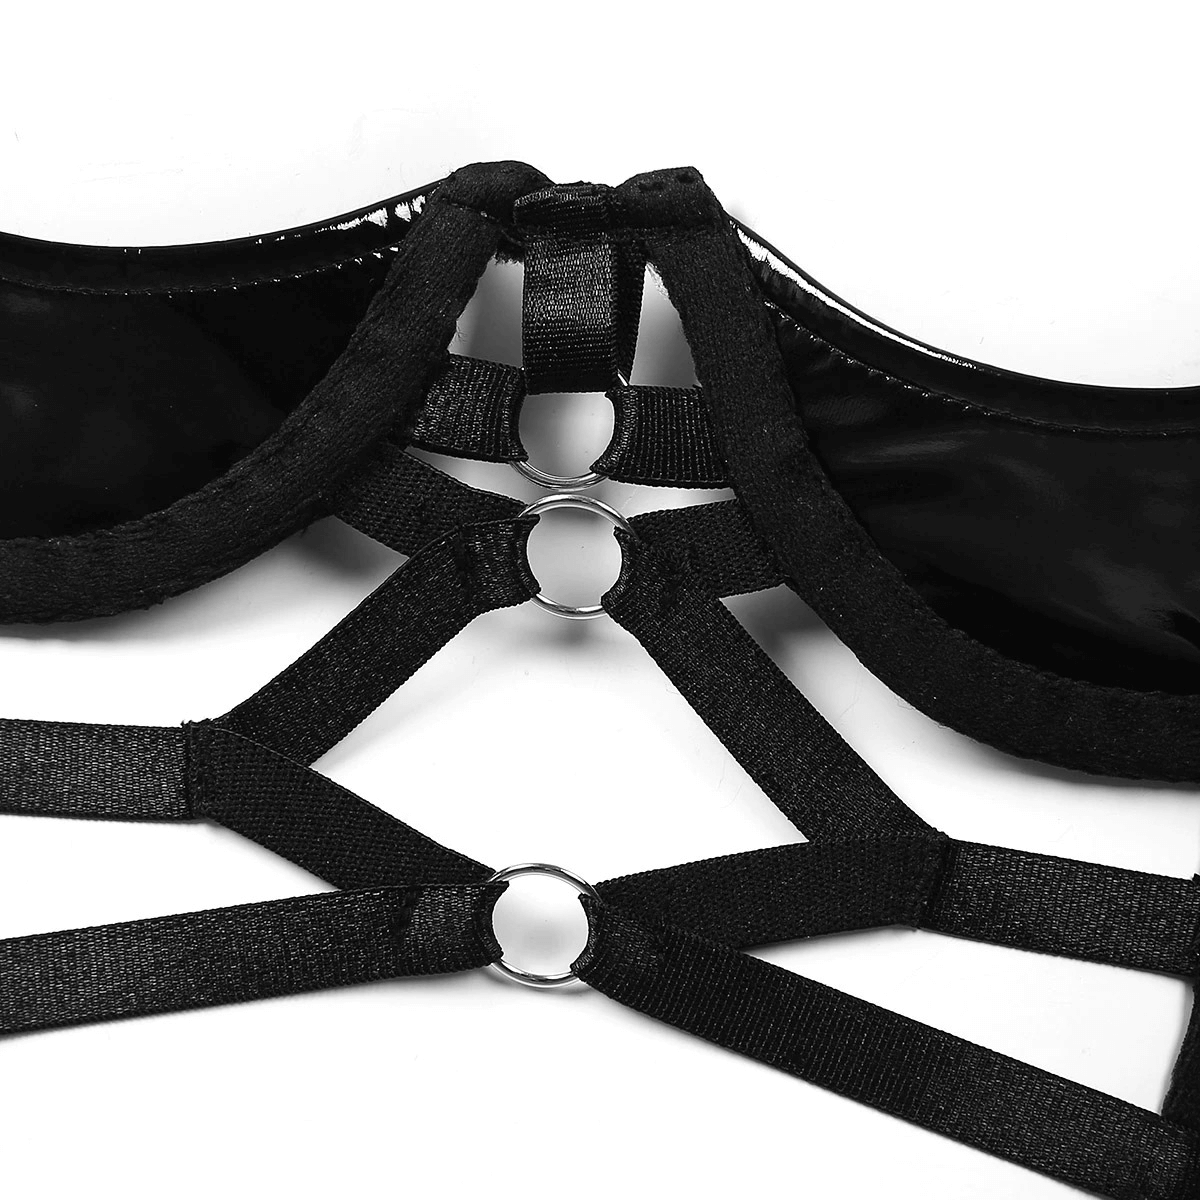 CLEARANCE / Women's Sexy Bustier with Open Cup / Adjustable Straps Erotic Bra in Black Color - HARD'N'HEAVY